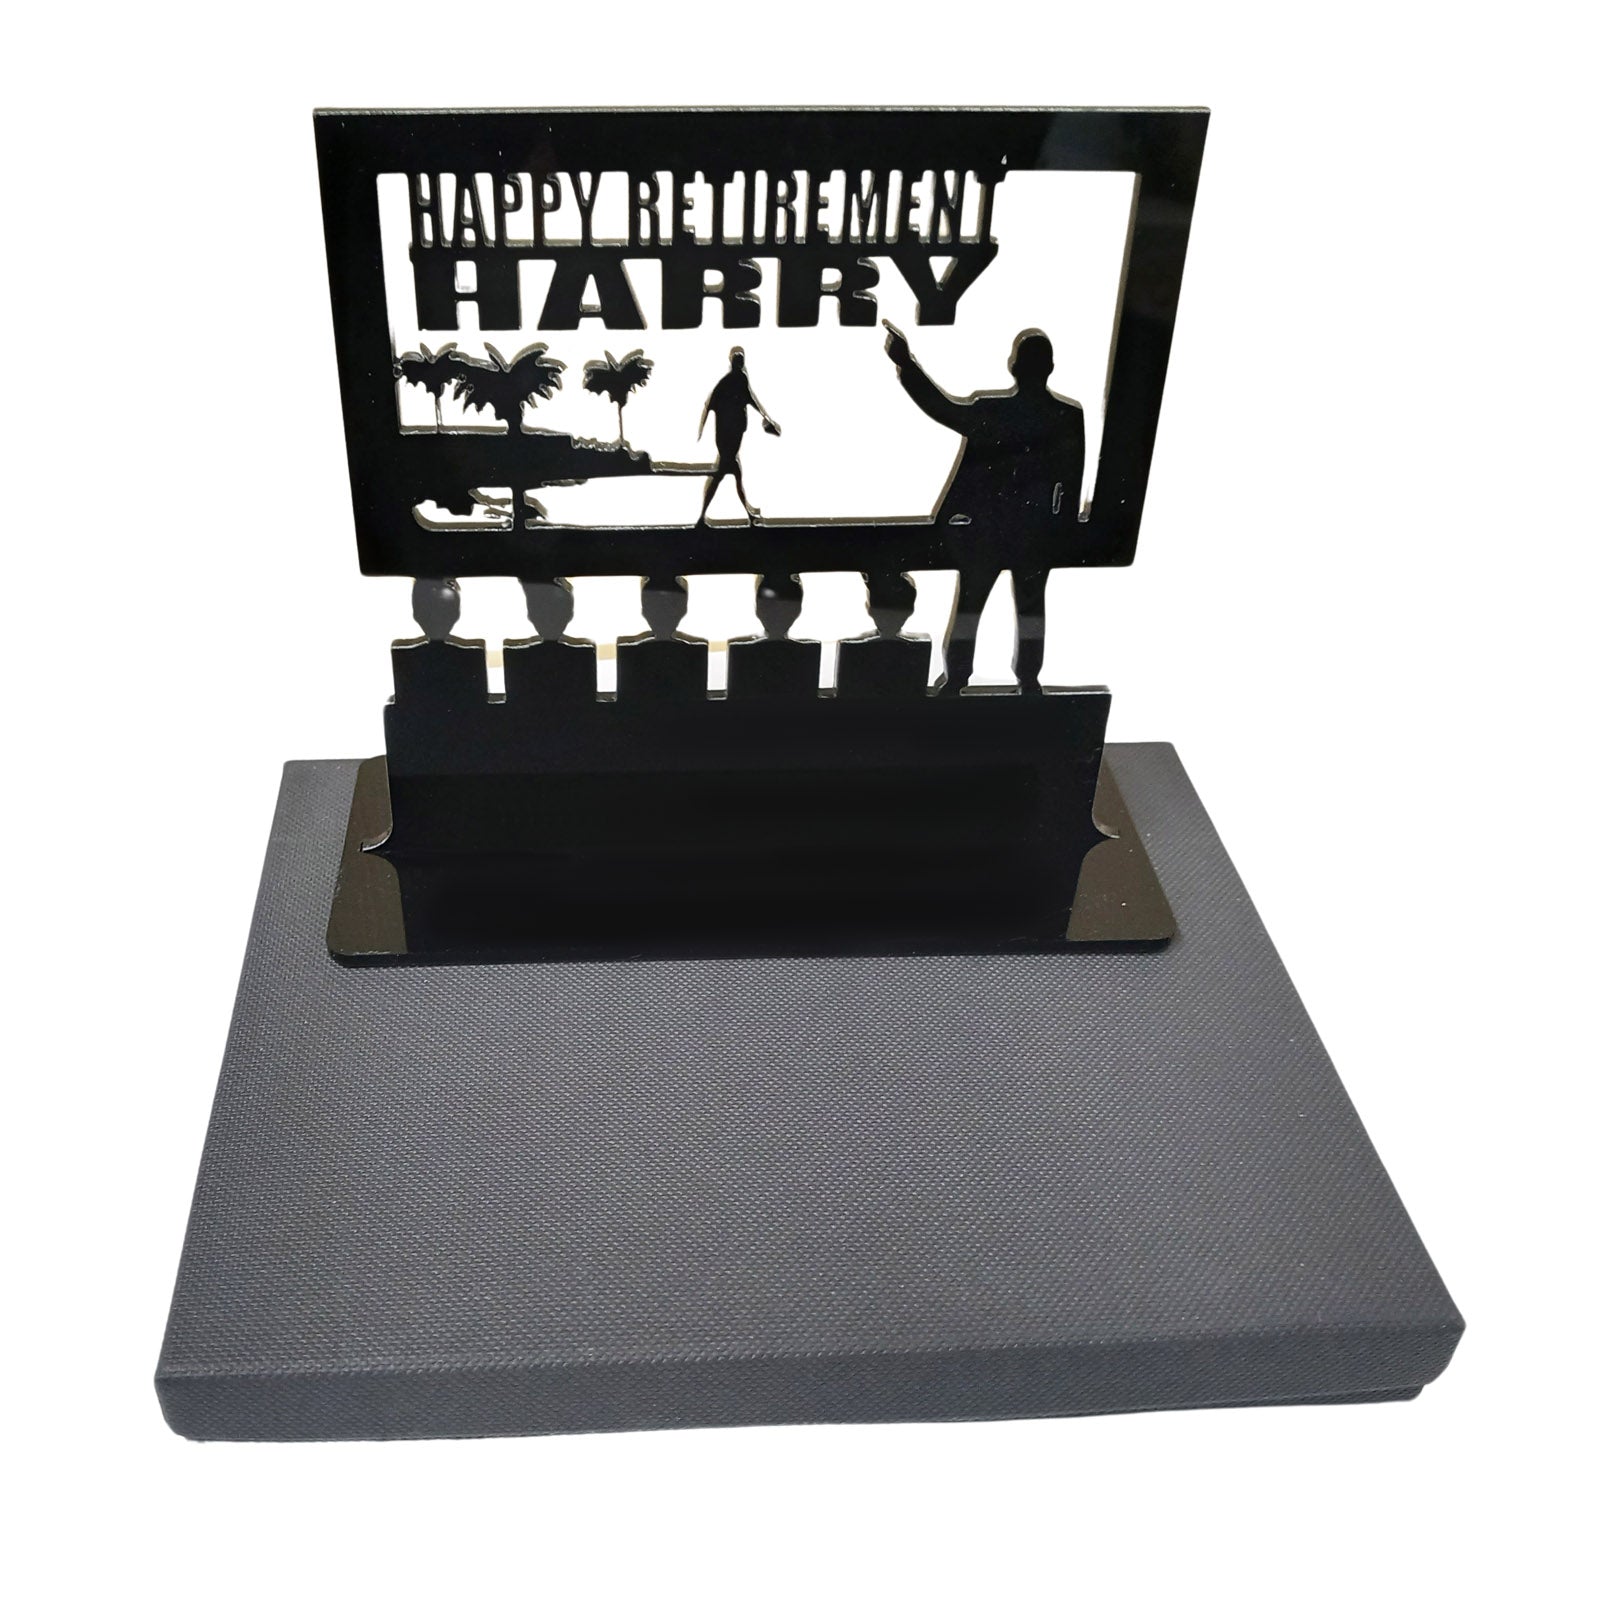 Acrylic personalised retirement plaque gift ideas for retiring teachers from students. Standalone keepsake ornaments.